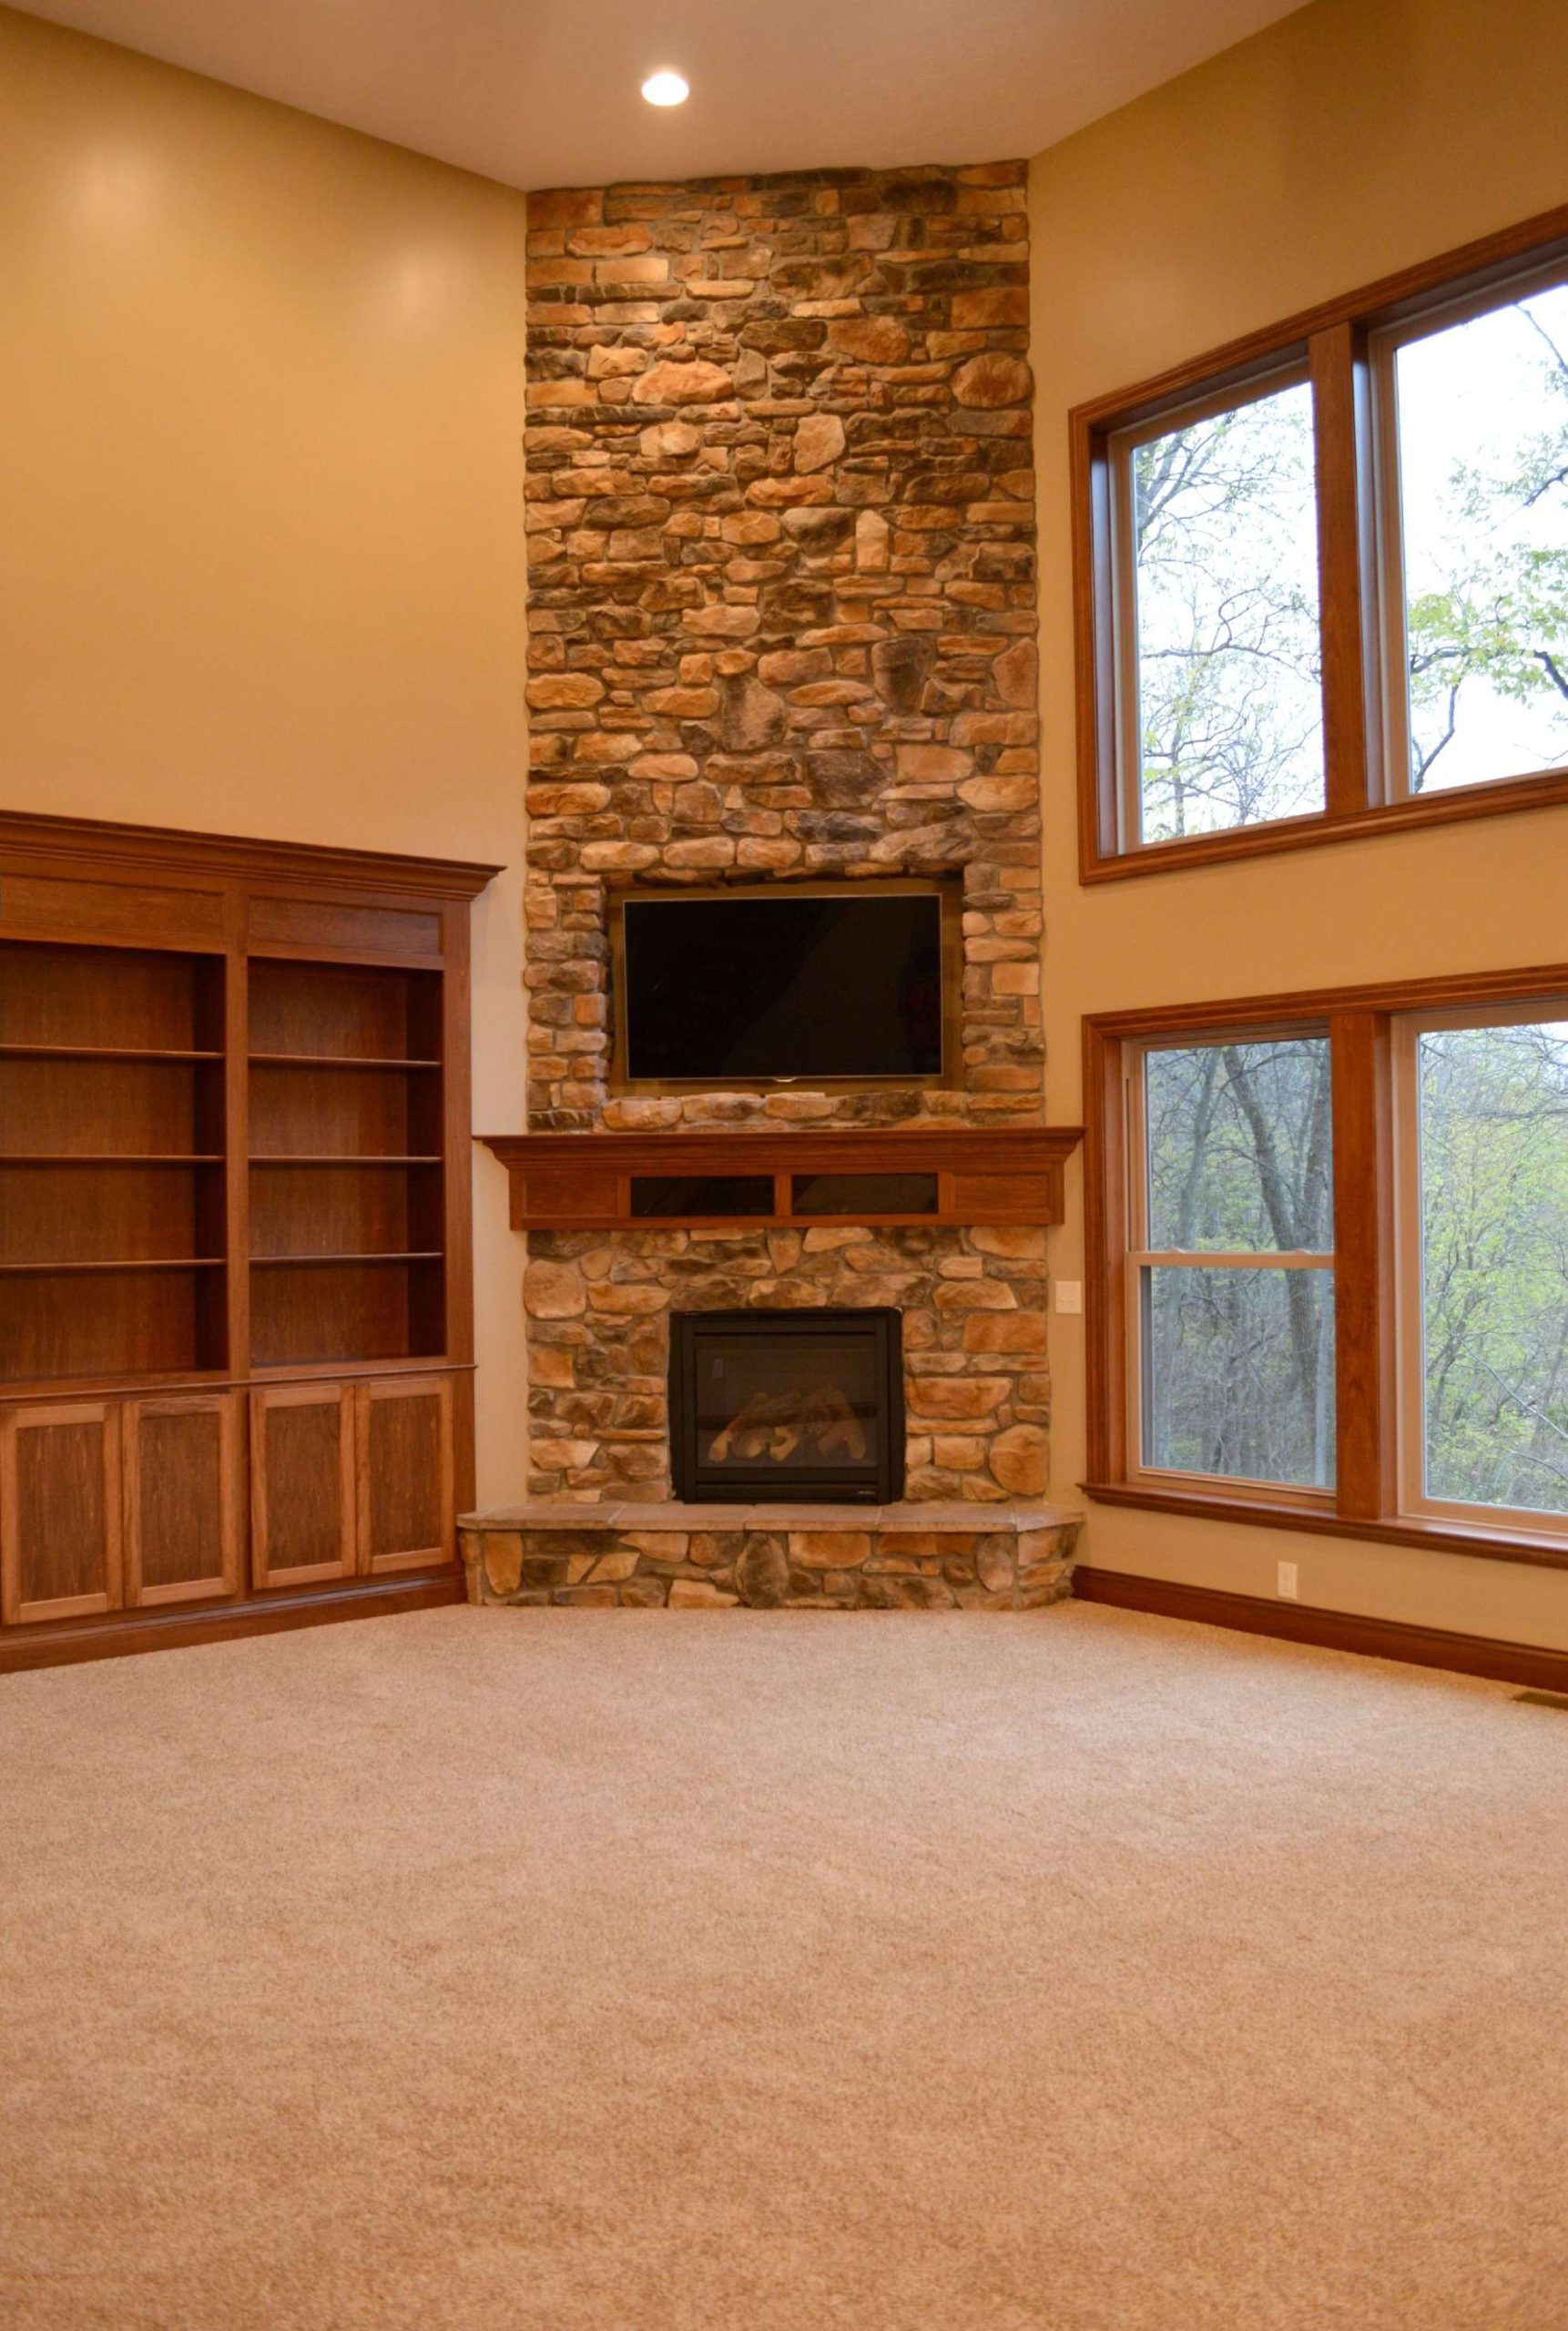 Floor to ceiling corner stone fireplace  Stone fireplace designs